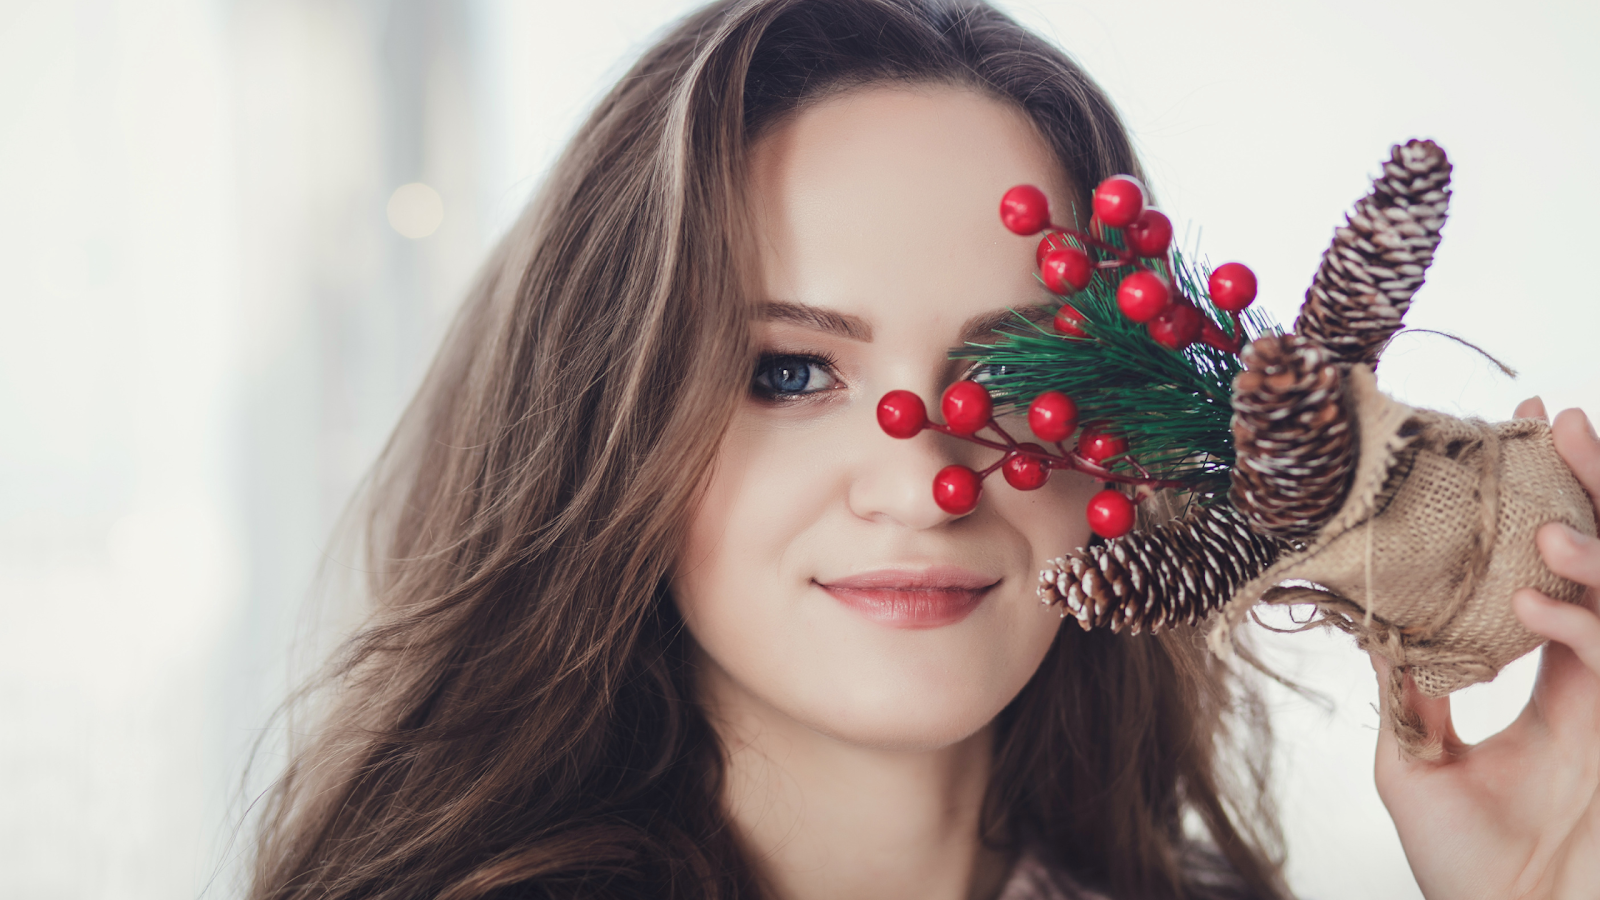 A woman holds a bundle of holiday decorations in front of her smooth face